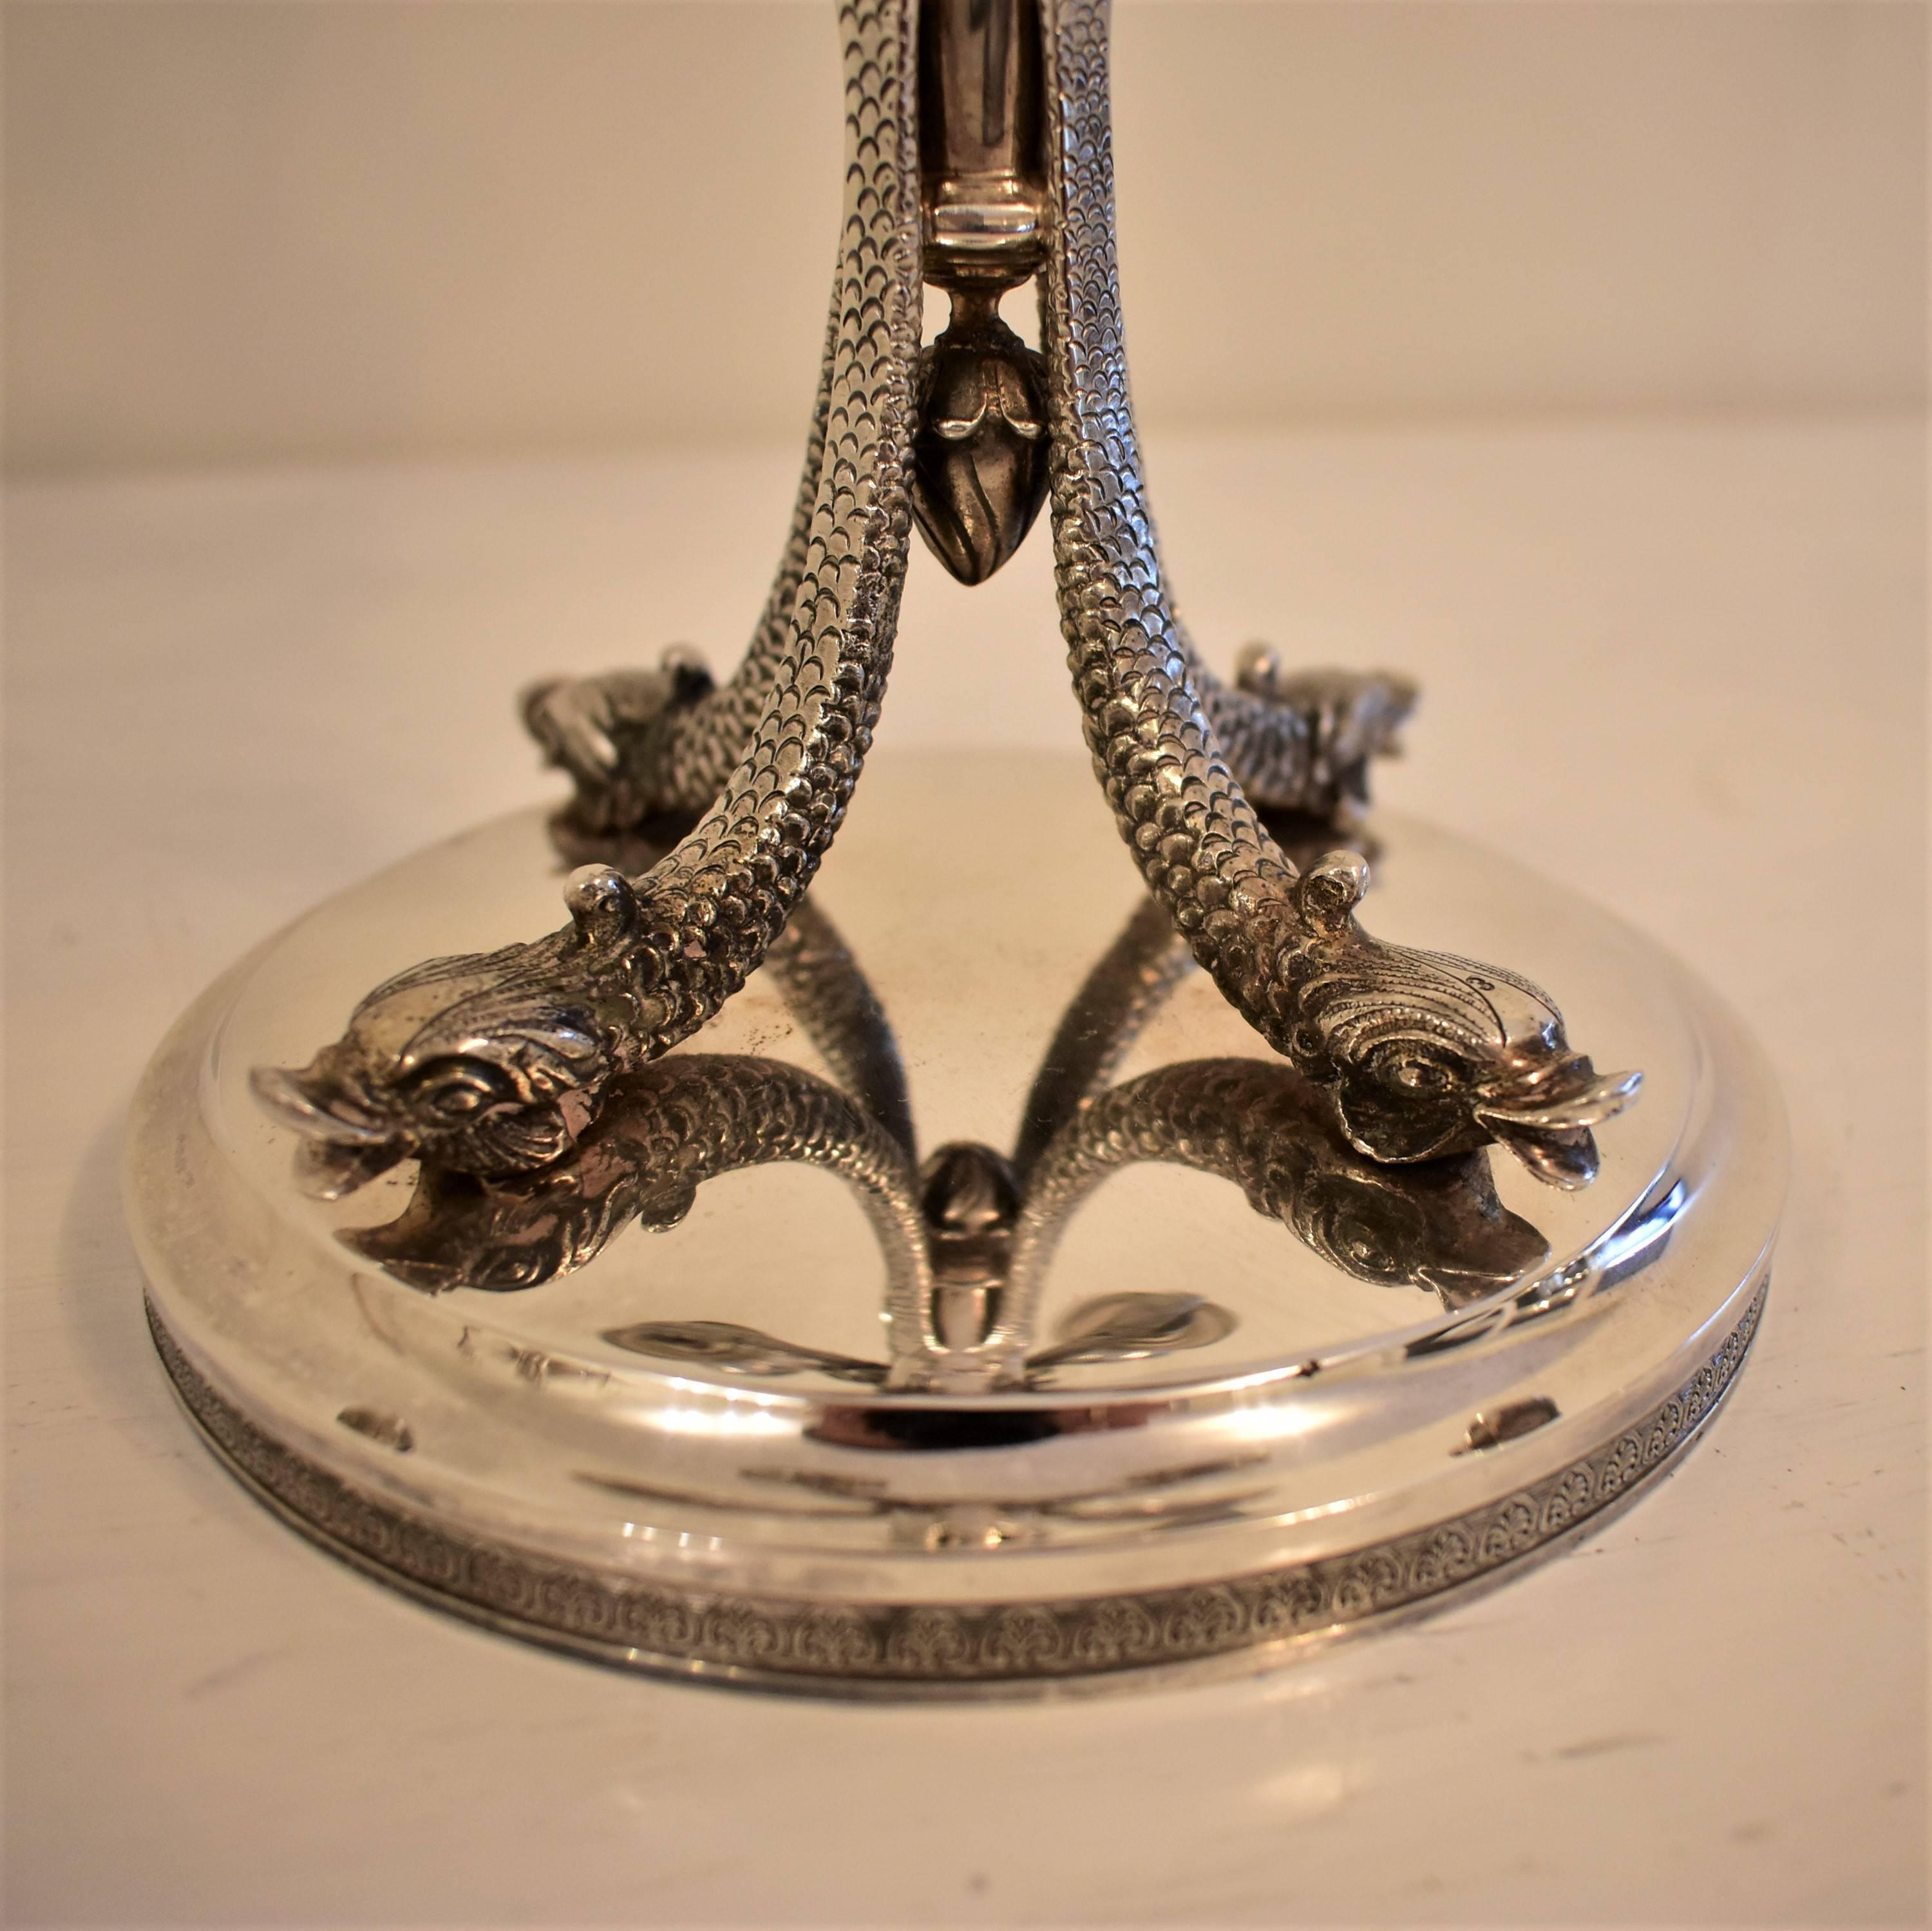 Hungarian 20th Century Silver Five Branch Candlesticks Engraved with Fish Details For Sale